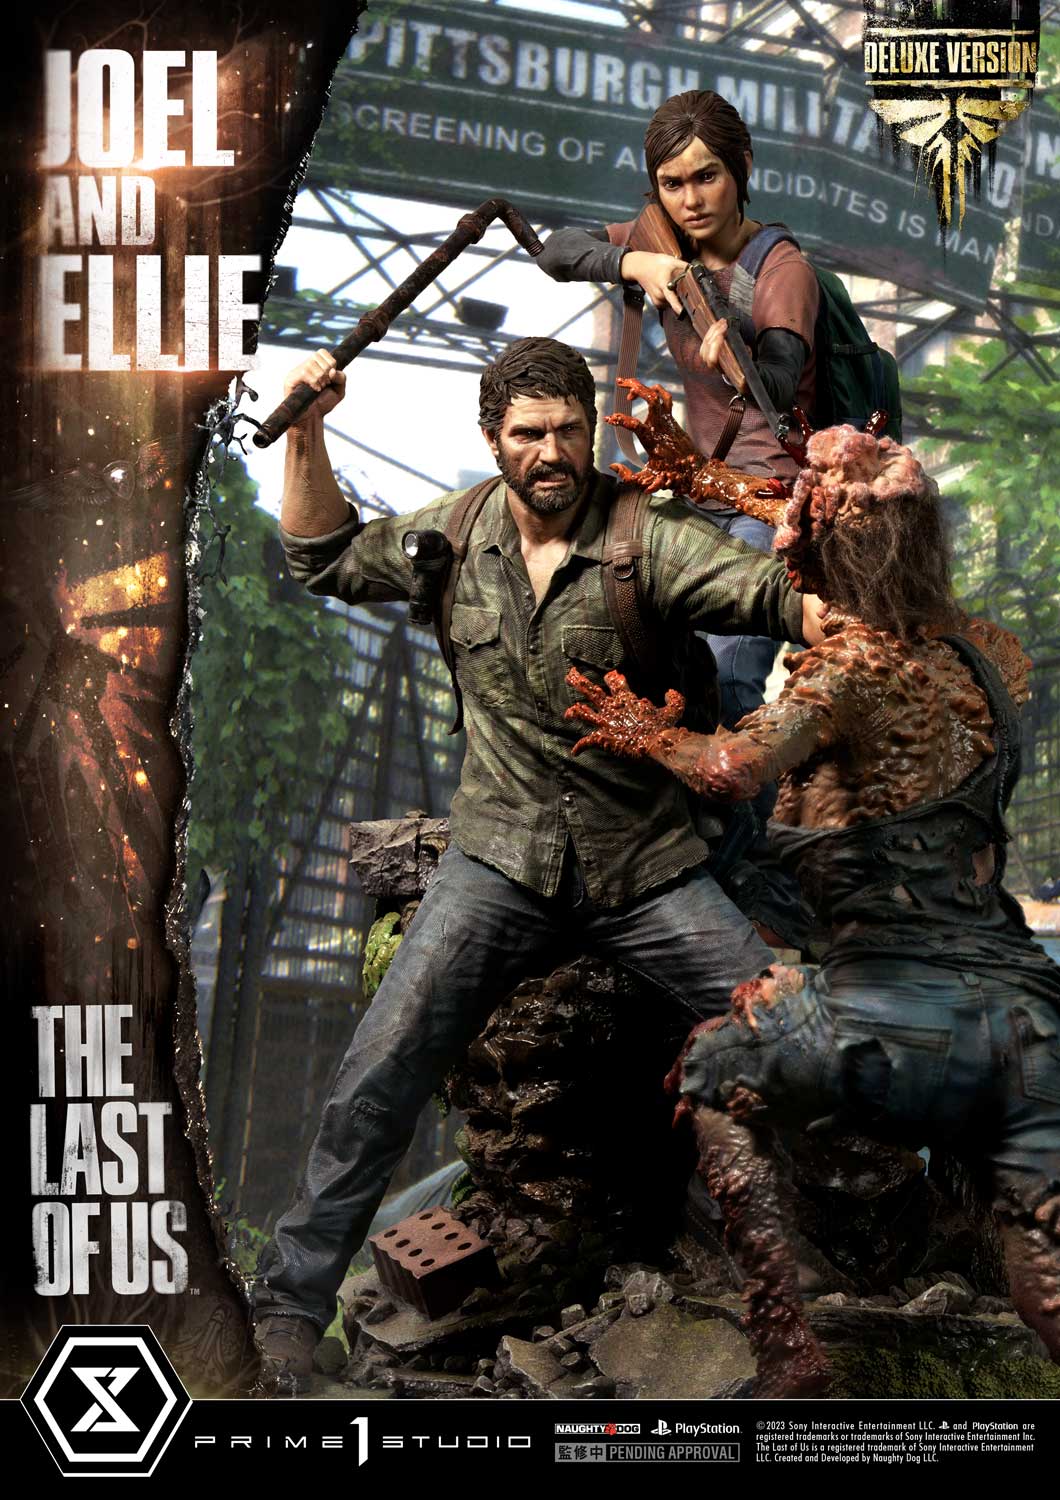 The Last of Us Part 2 - Ellie - Video Game Poster (24 x 36 inches)